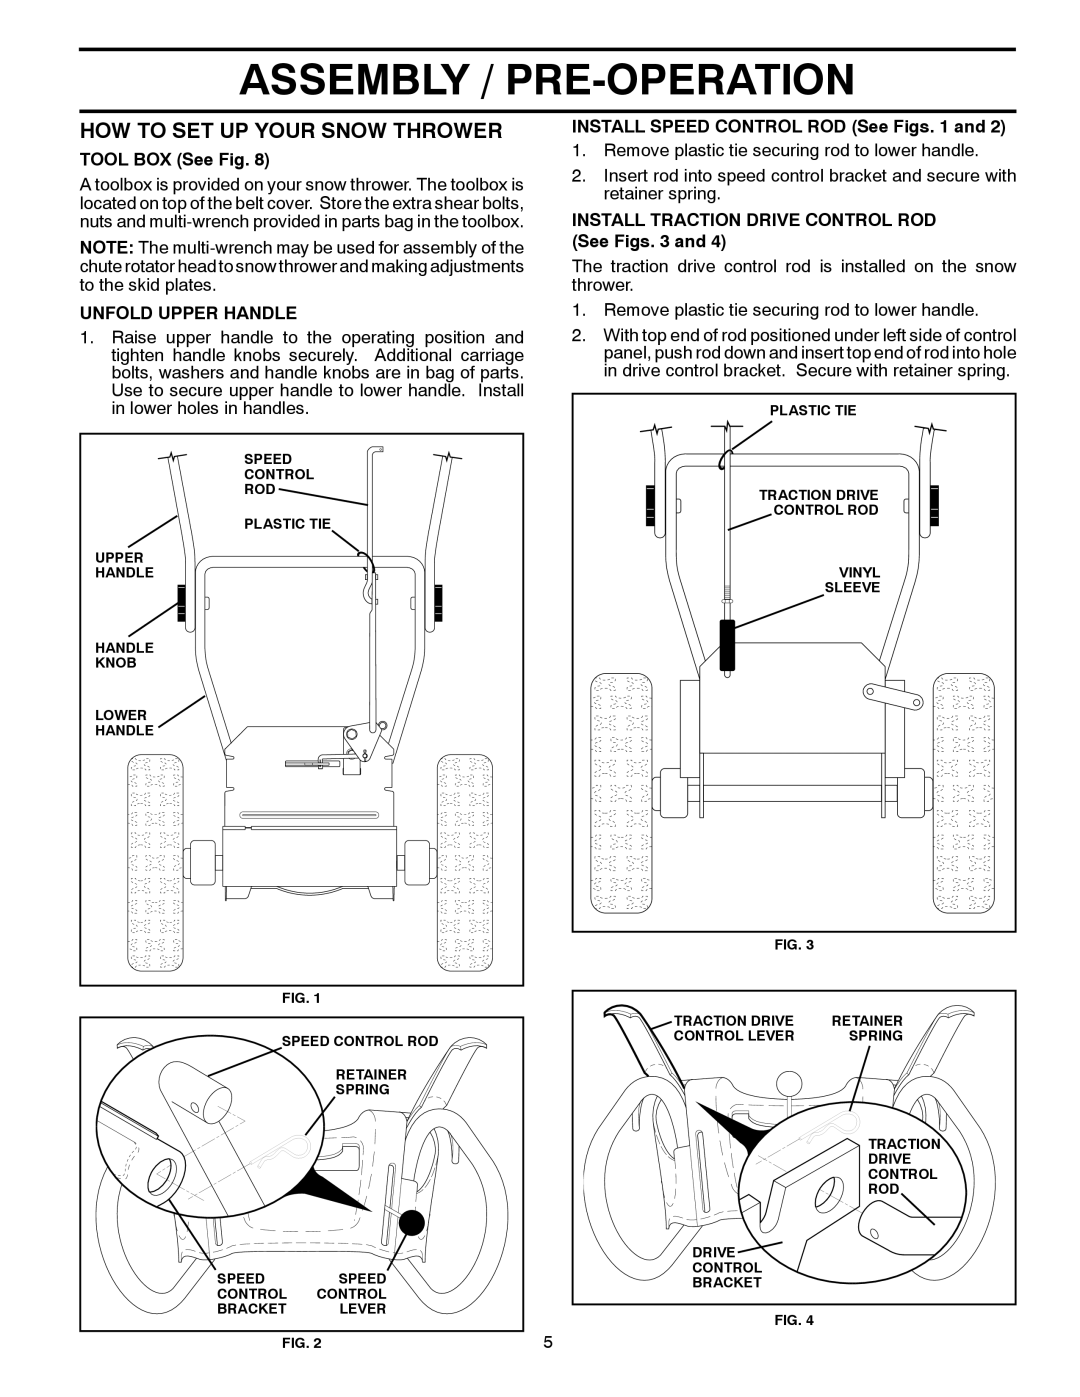 Poulan XT827ES, 428863 How To Set Up Your Snow Thrower, Assembly / Pre-Operation, TOOL BOX See Fig, Unfold Upper Handle 